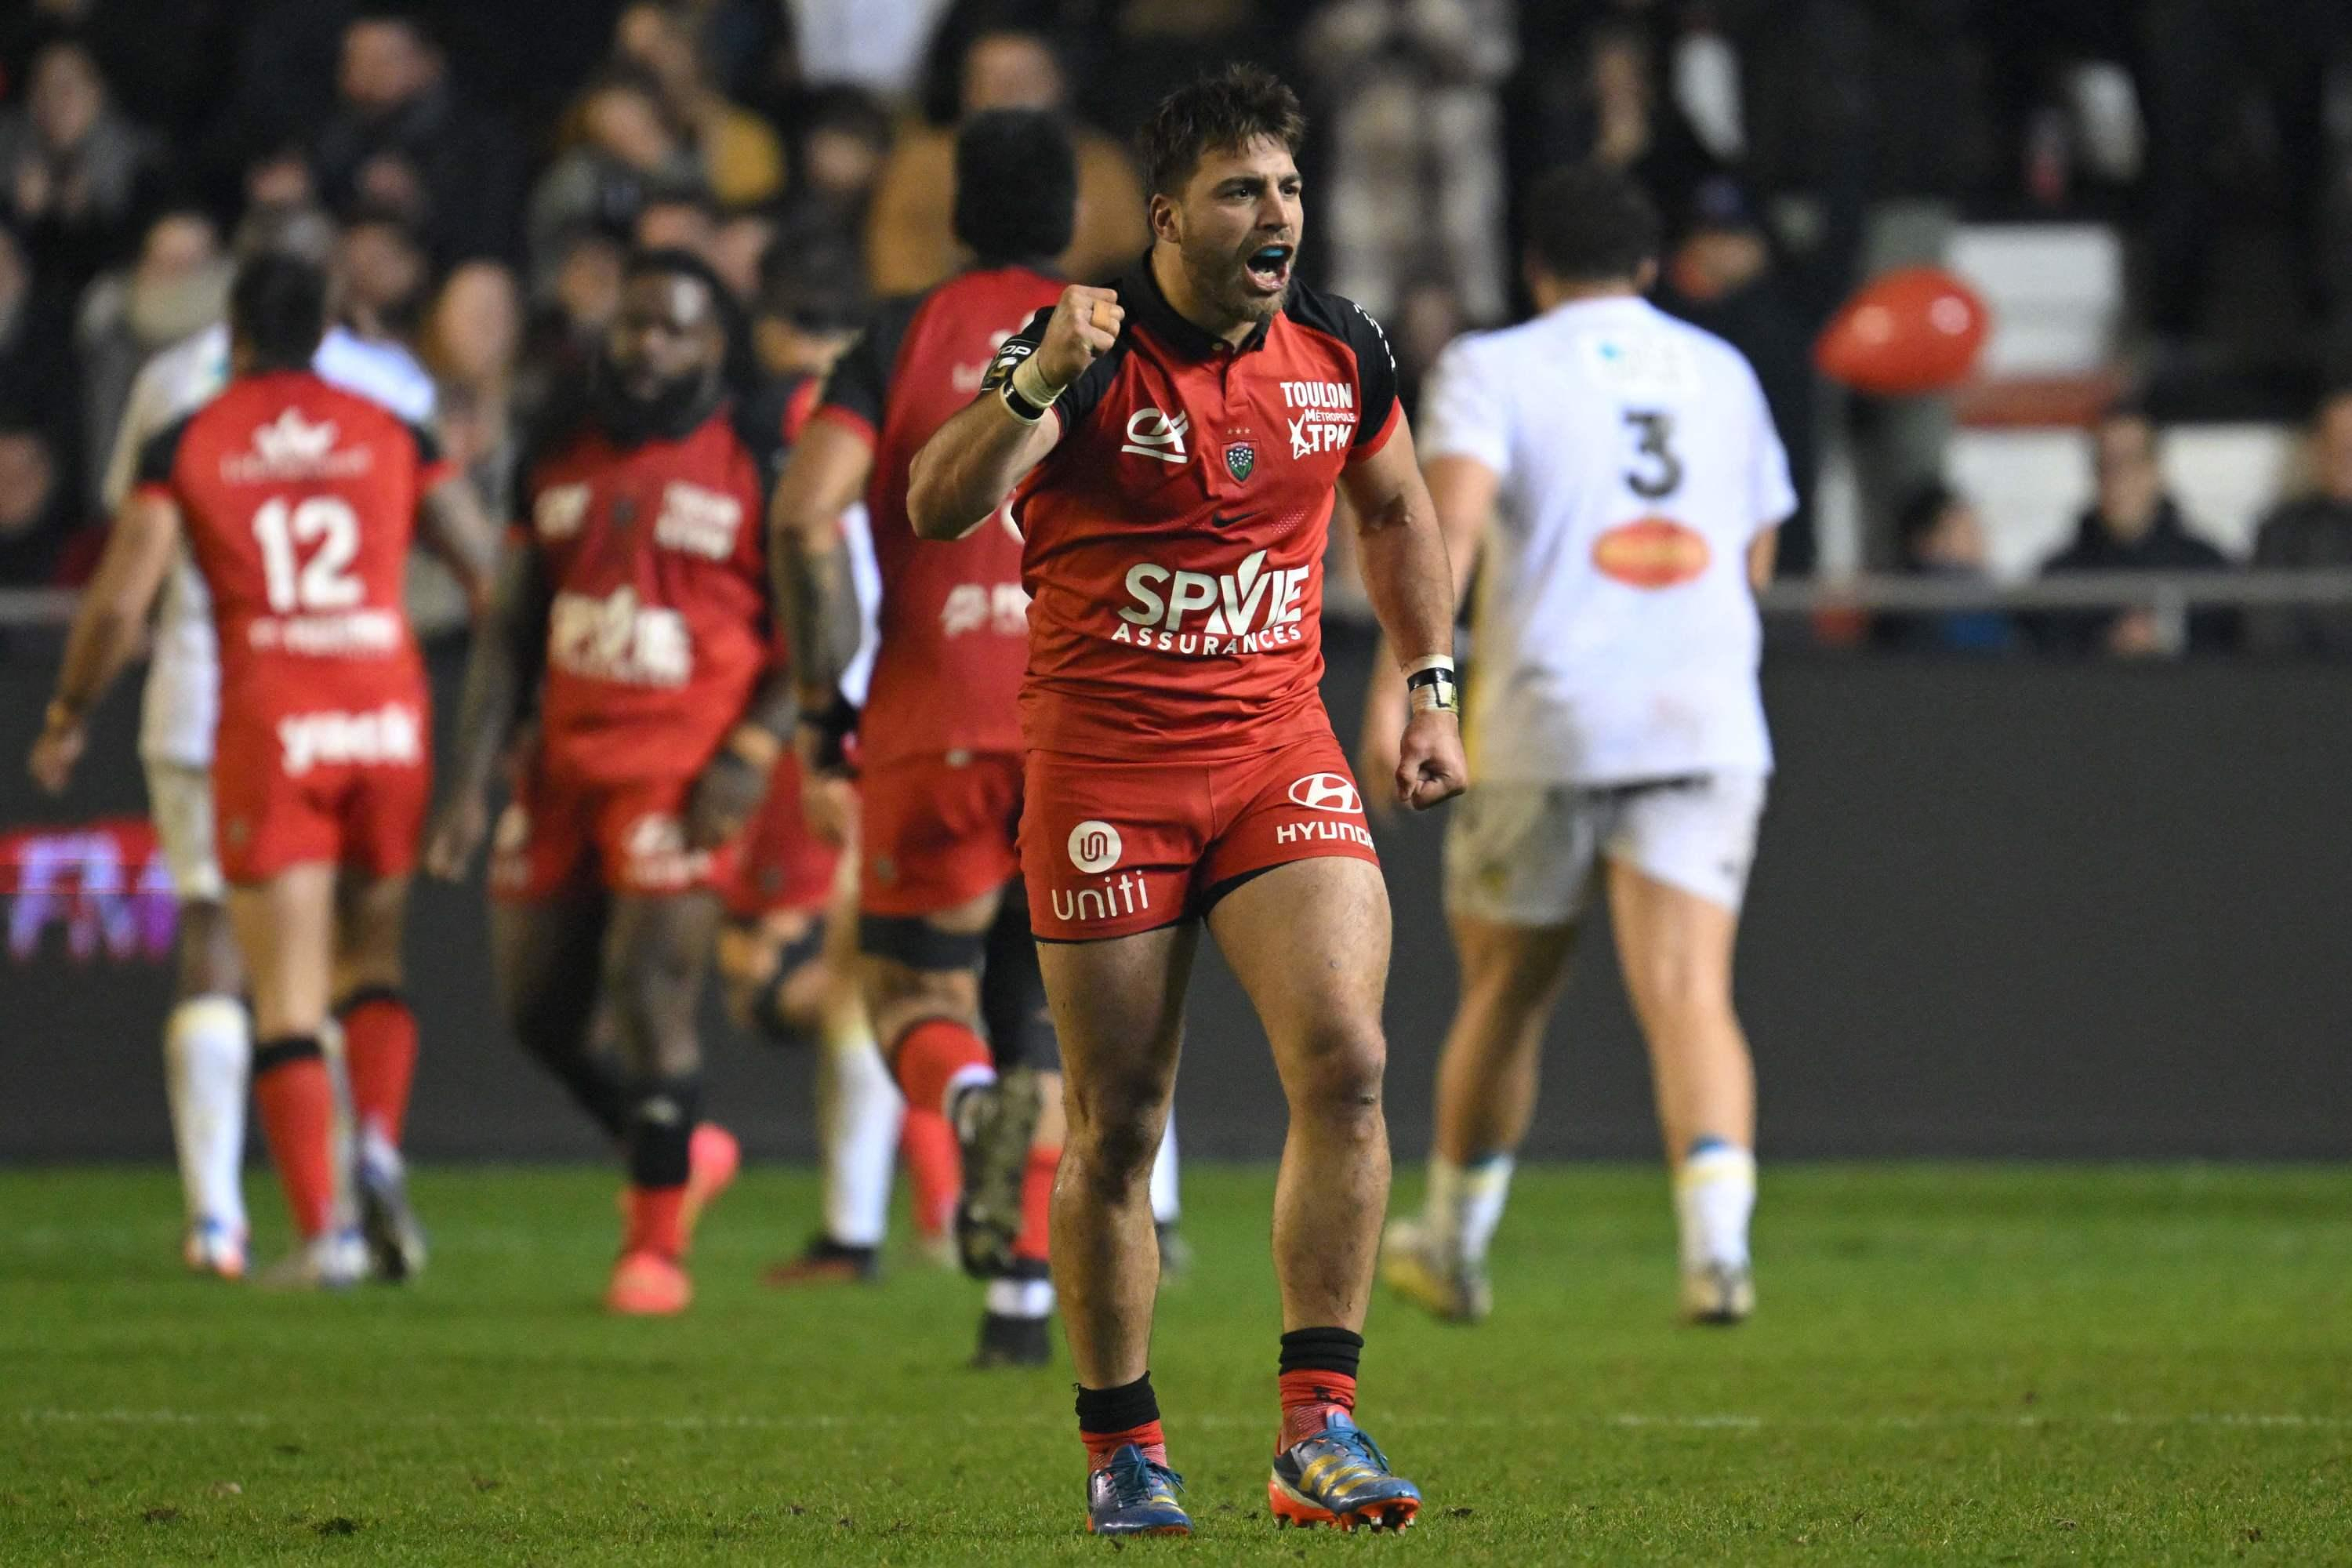 Top 14: Toulon beats La Rochelle and comes within one point of the podium